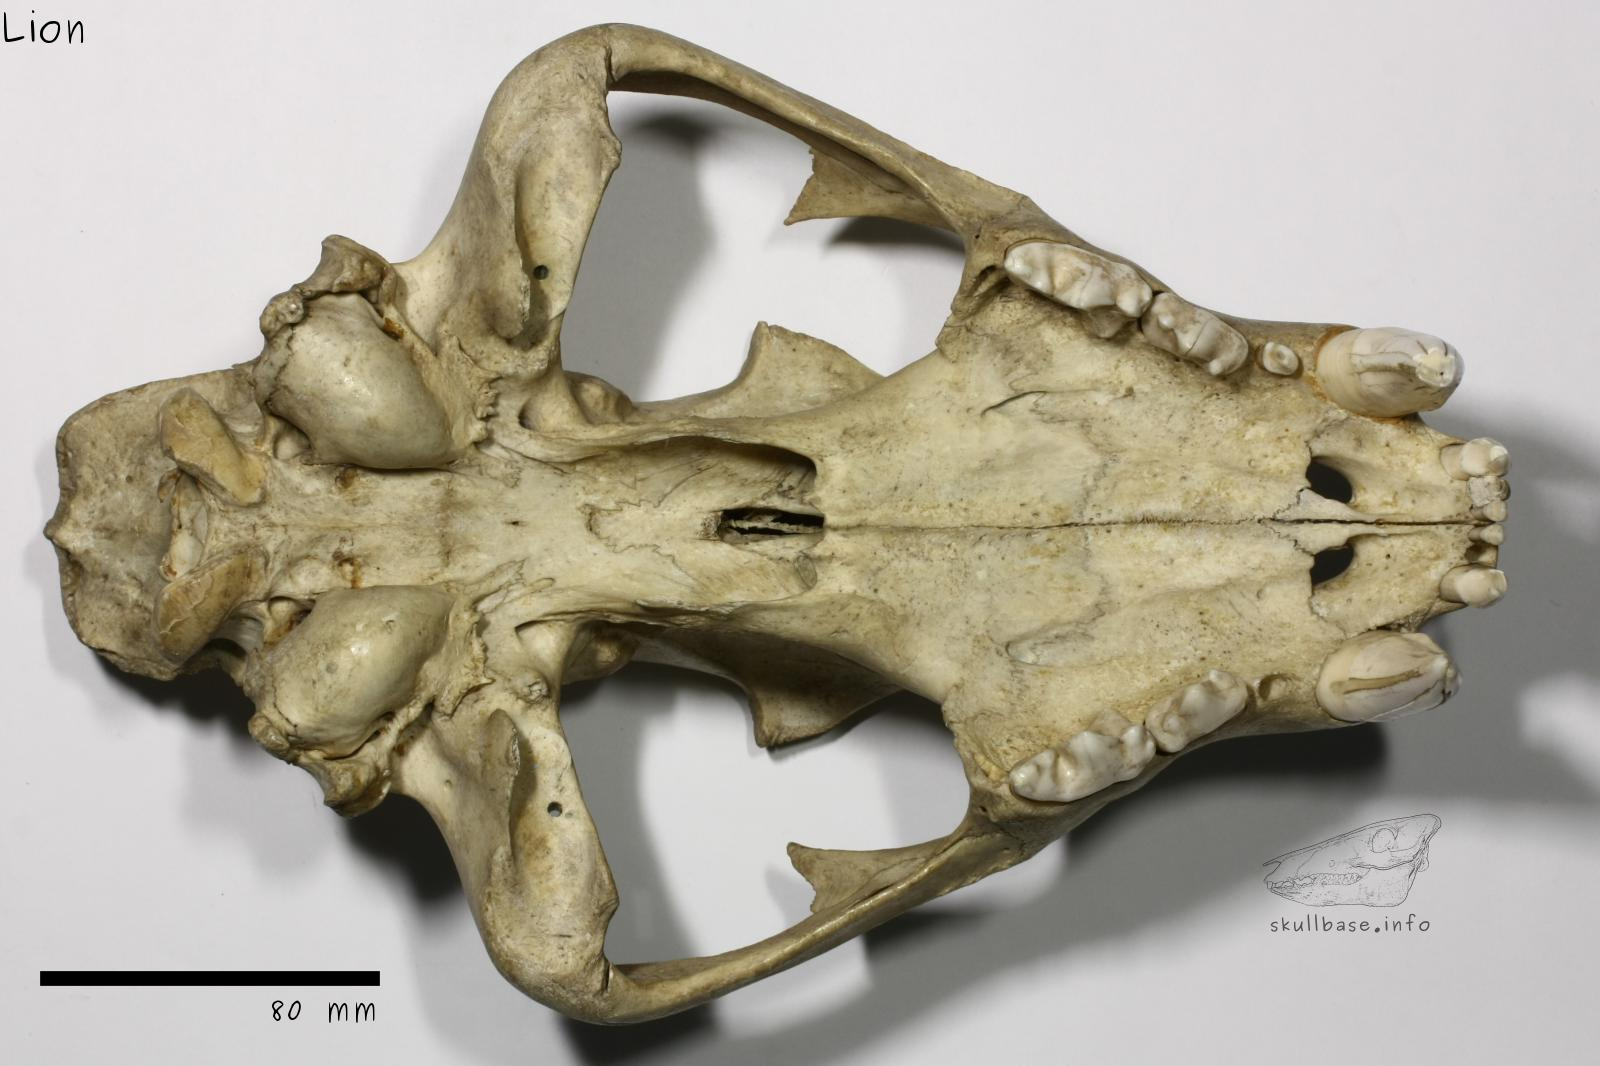 Lion (Panthera leo) skull ventral view